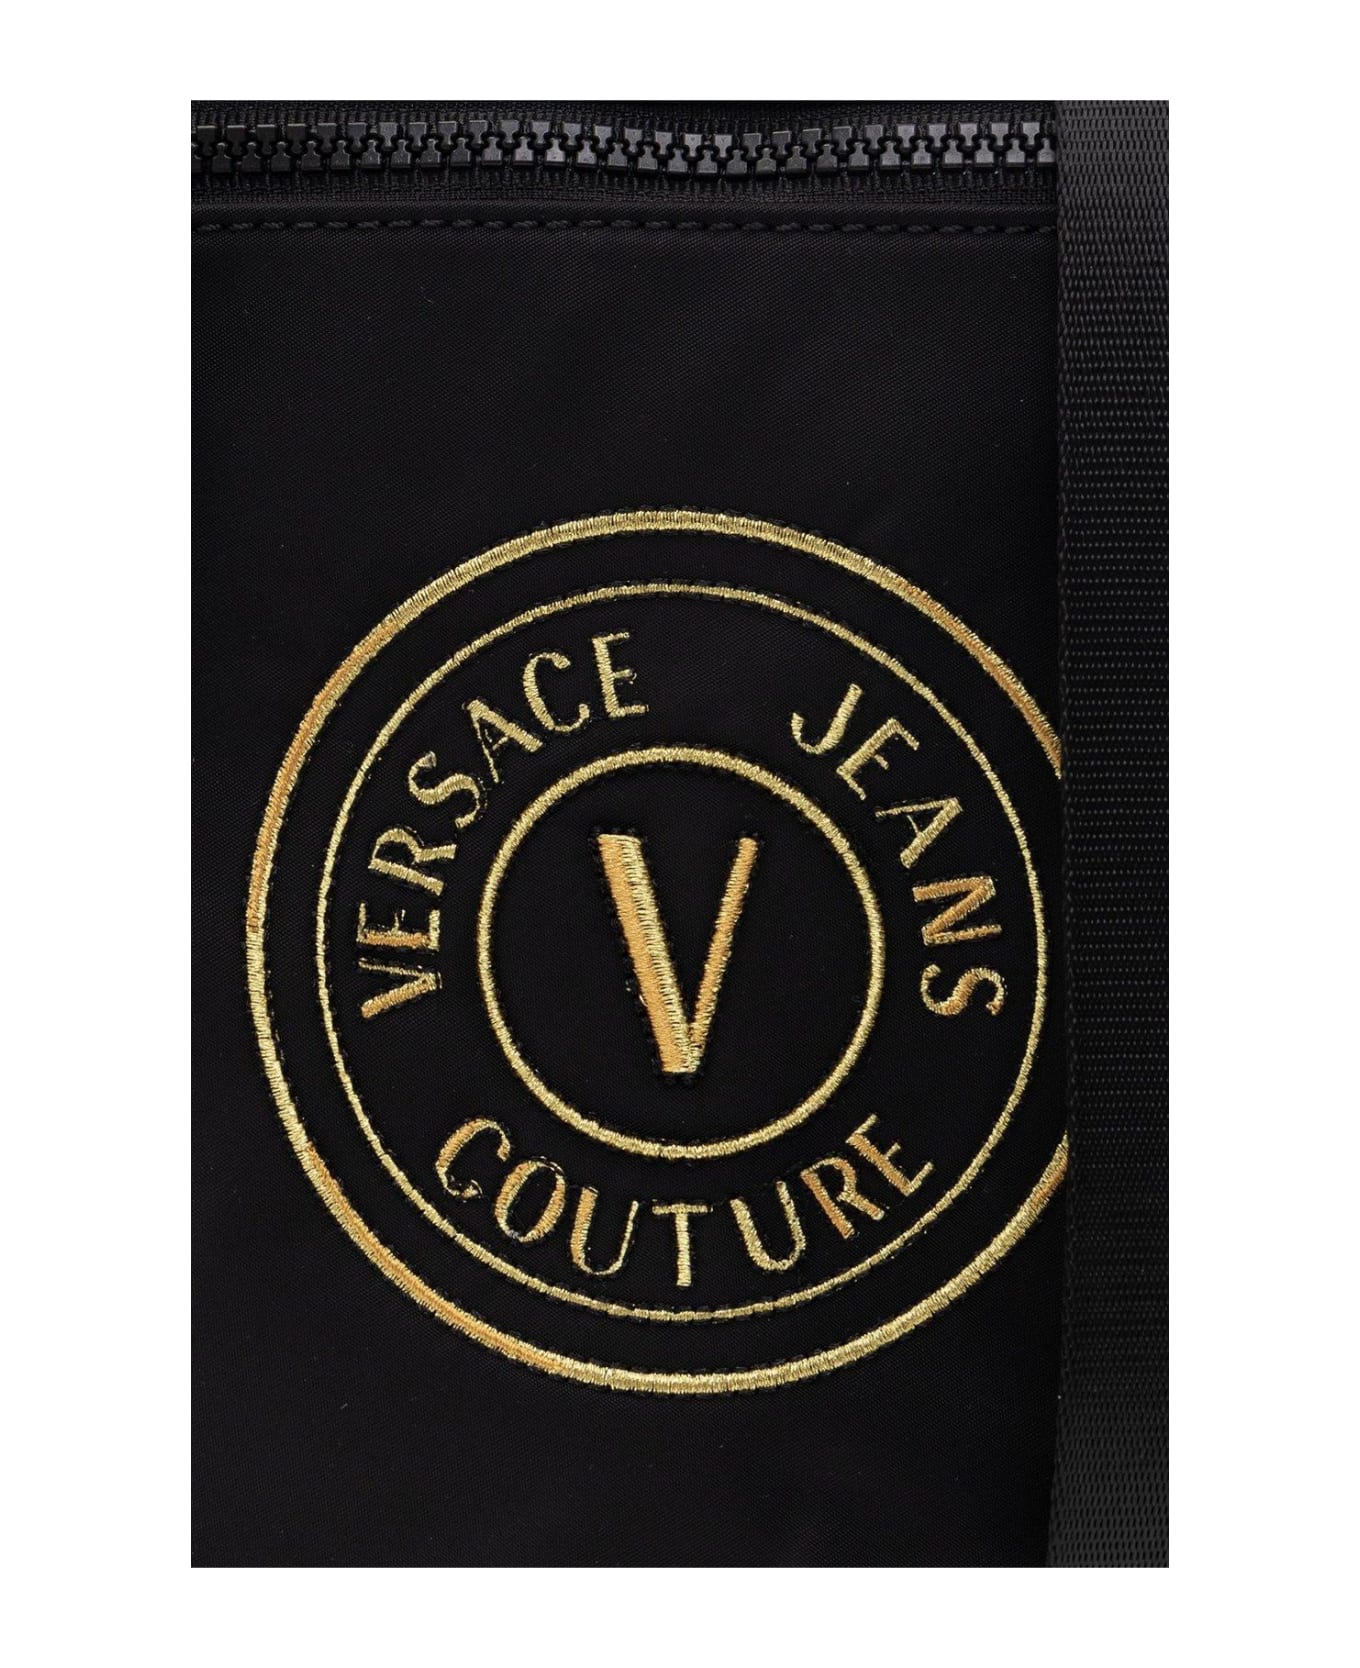 Versace Jeans Couture Logo Embroidered Zipped Messenger Bag - Black